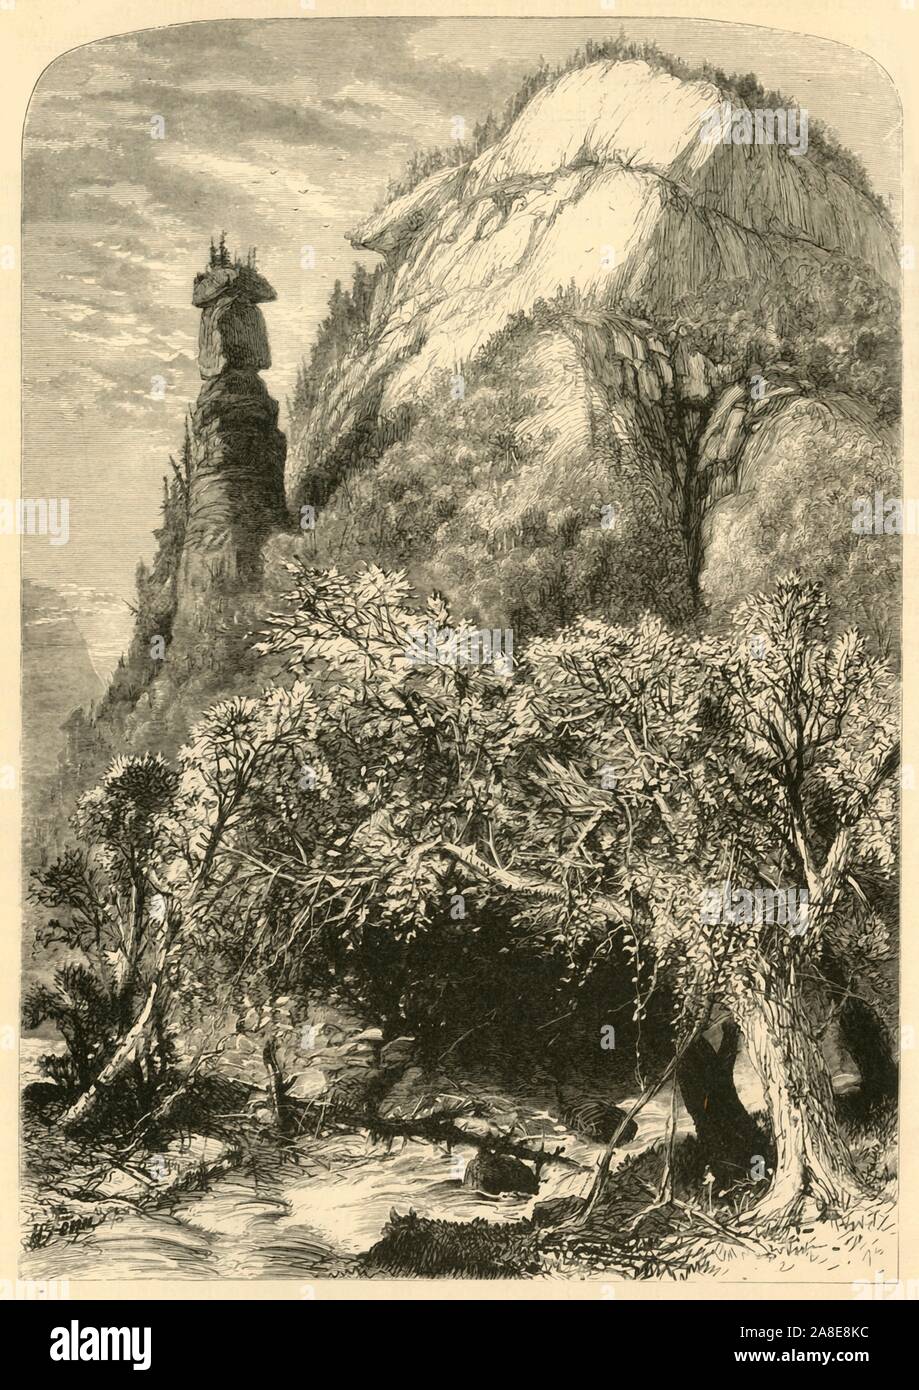 'Chimney Rock, Hickory-Nut Gap', 1872. Unusual rock formation in North Carolina, USA. From &quot;Picturesque America; or, The Land We Live In, A Delineation by Pen and Pencil of the Mountains, Rivers, Lakes...with Illustrations on Steel and Wood by Eminent American Artists&quot; Vol. I, edited by William Cullen Bryant. [D. Appleton and Company, New York, 1872] Stock Photo